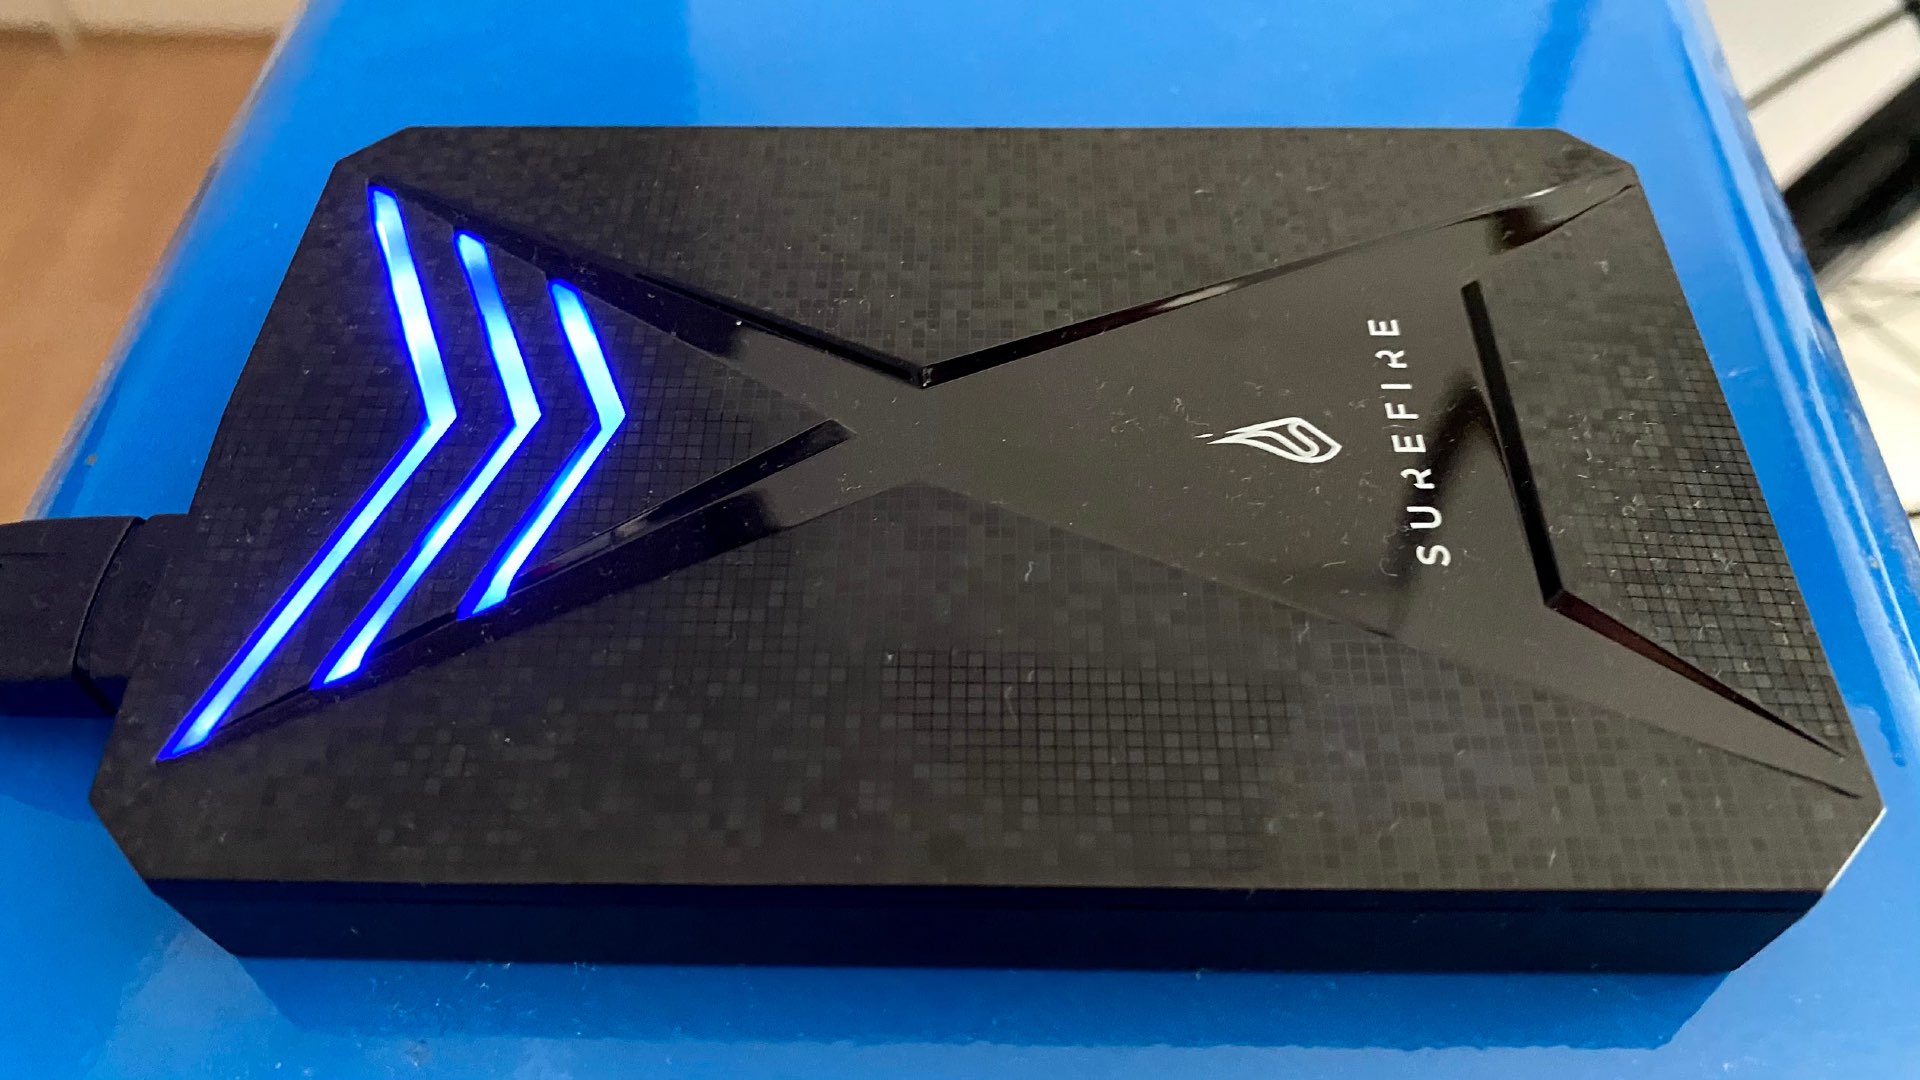 Surefire GX3 external gaming SSD review – storage with style